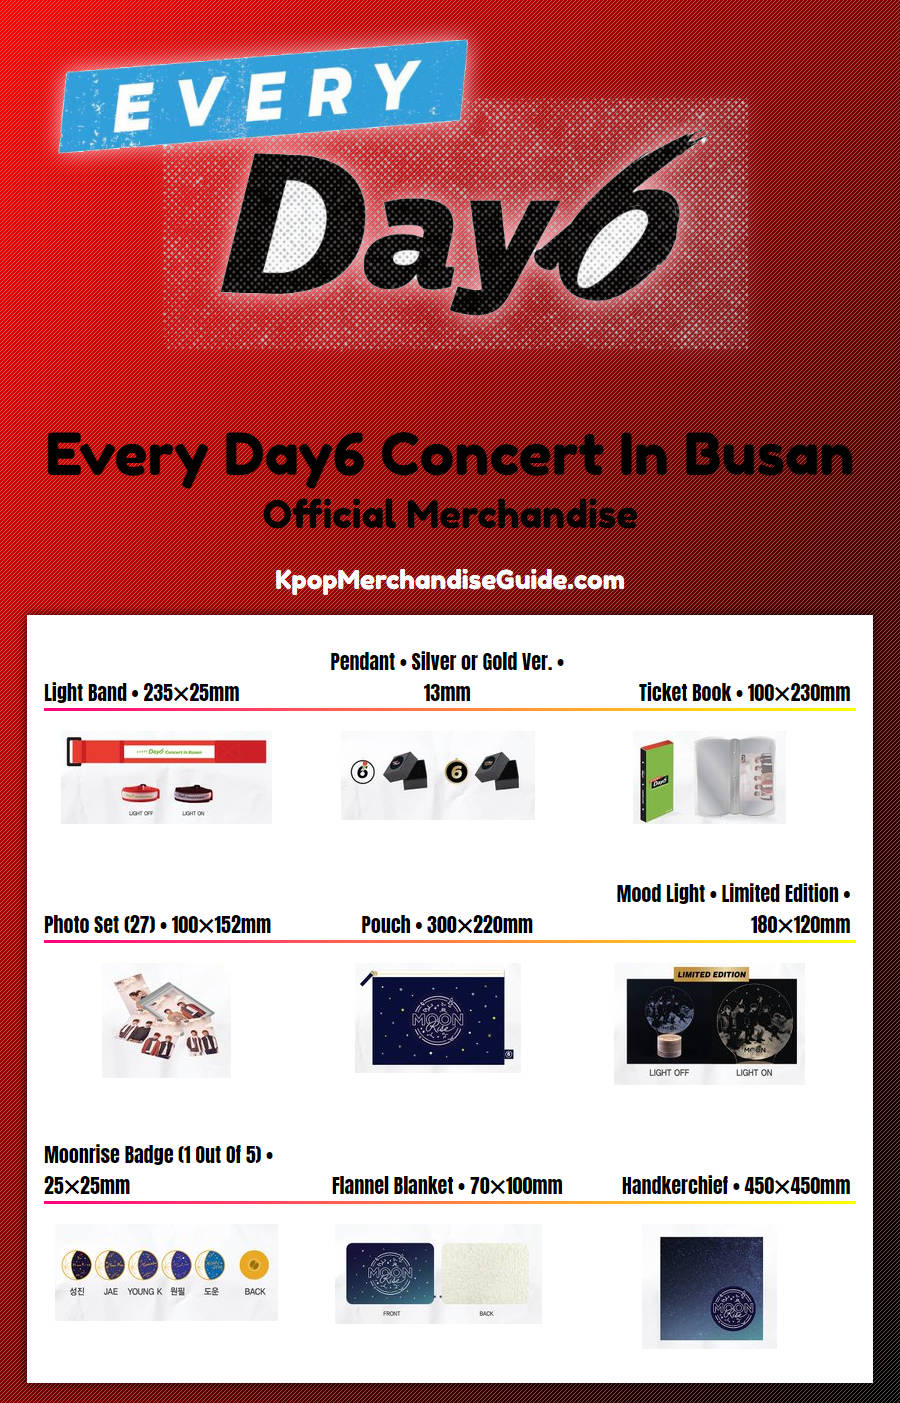 Every Day6 Concert In Busan Merchandise